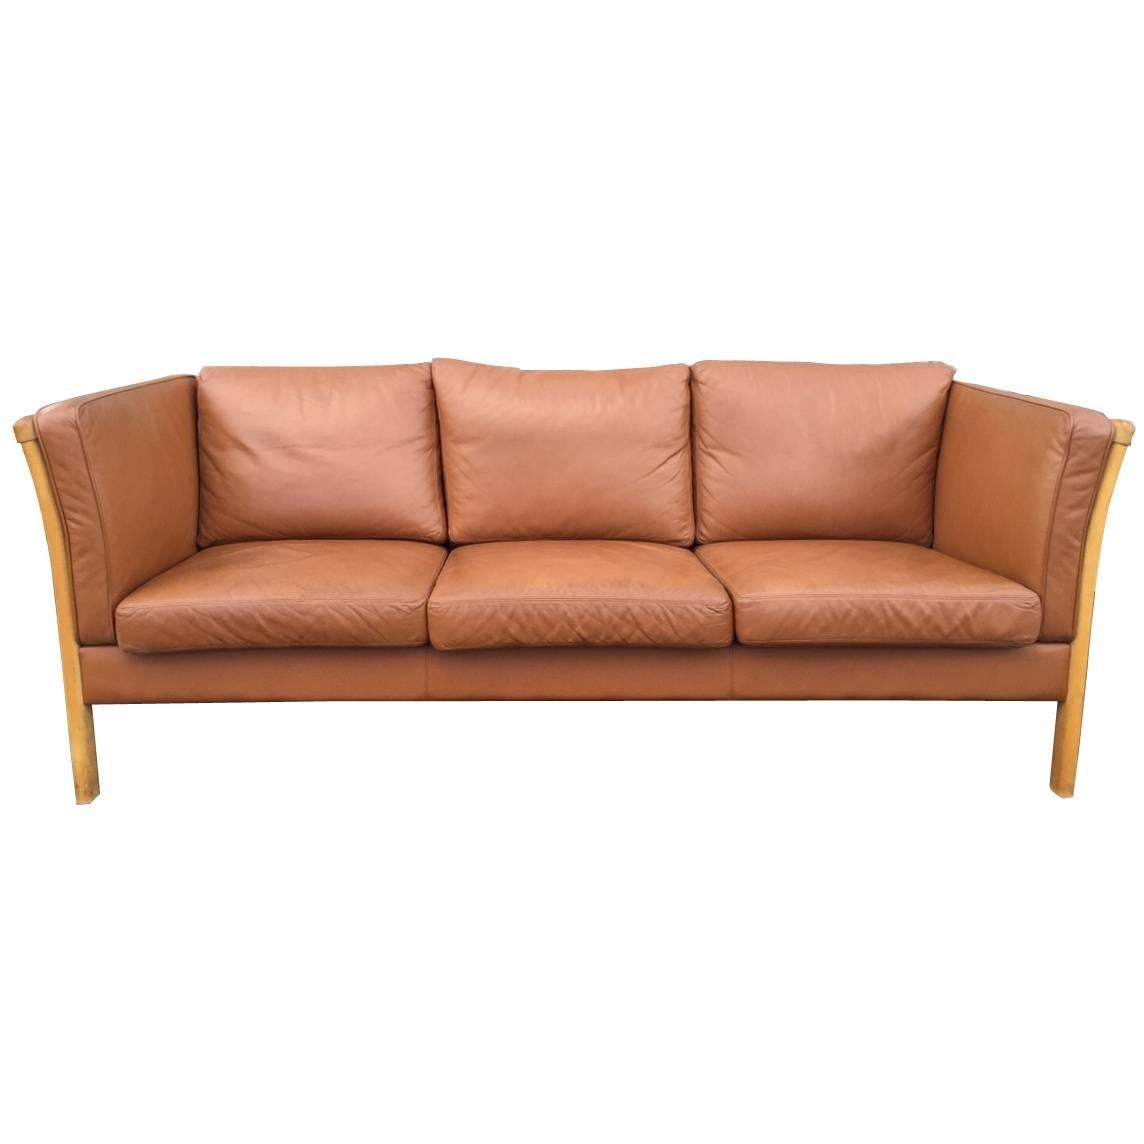 Vintage Danish Leather Sofa by Stouby